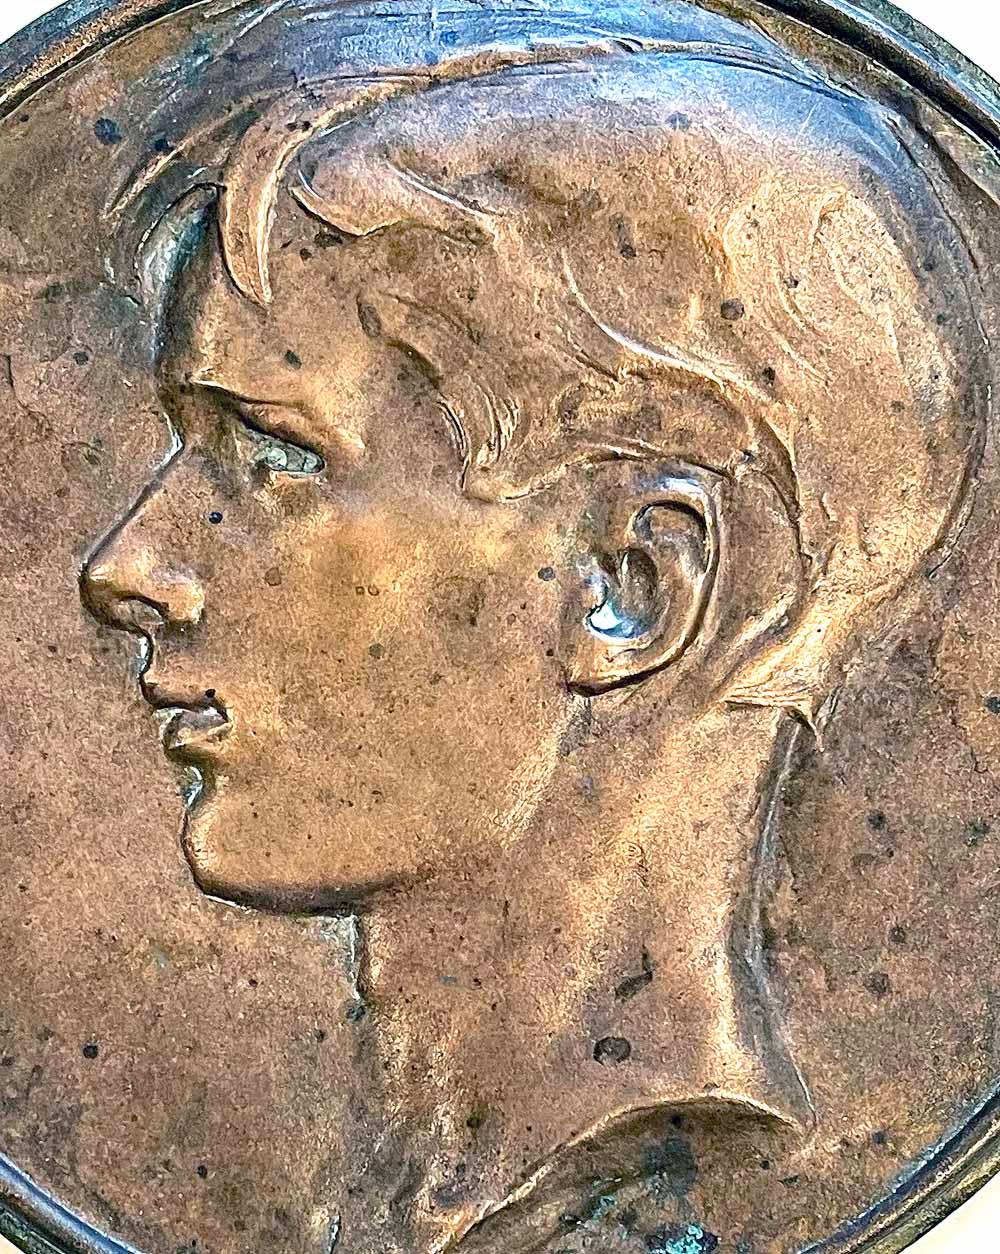 Beautifully modeled, cast and patinated, this bronze rondel features the head in profile of a young man with hair falling over his forehead, a strong nose, and sensitive mouth, probably sculpted in the late 1920s or 1930s.  It is not signed, but the